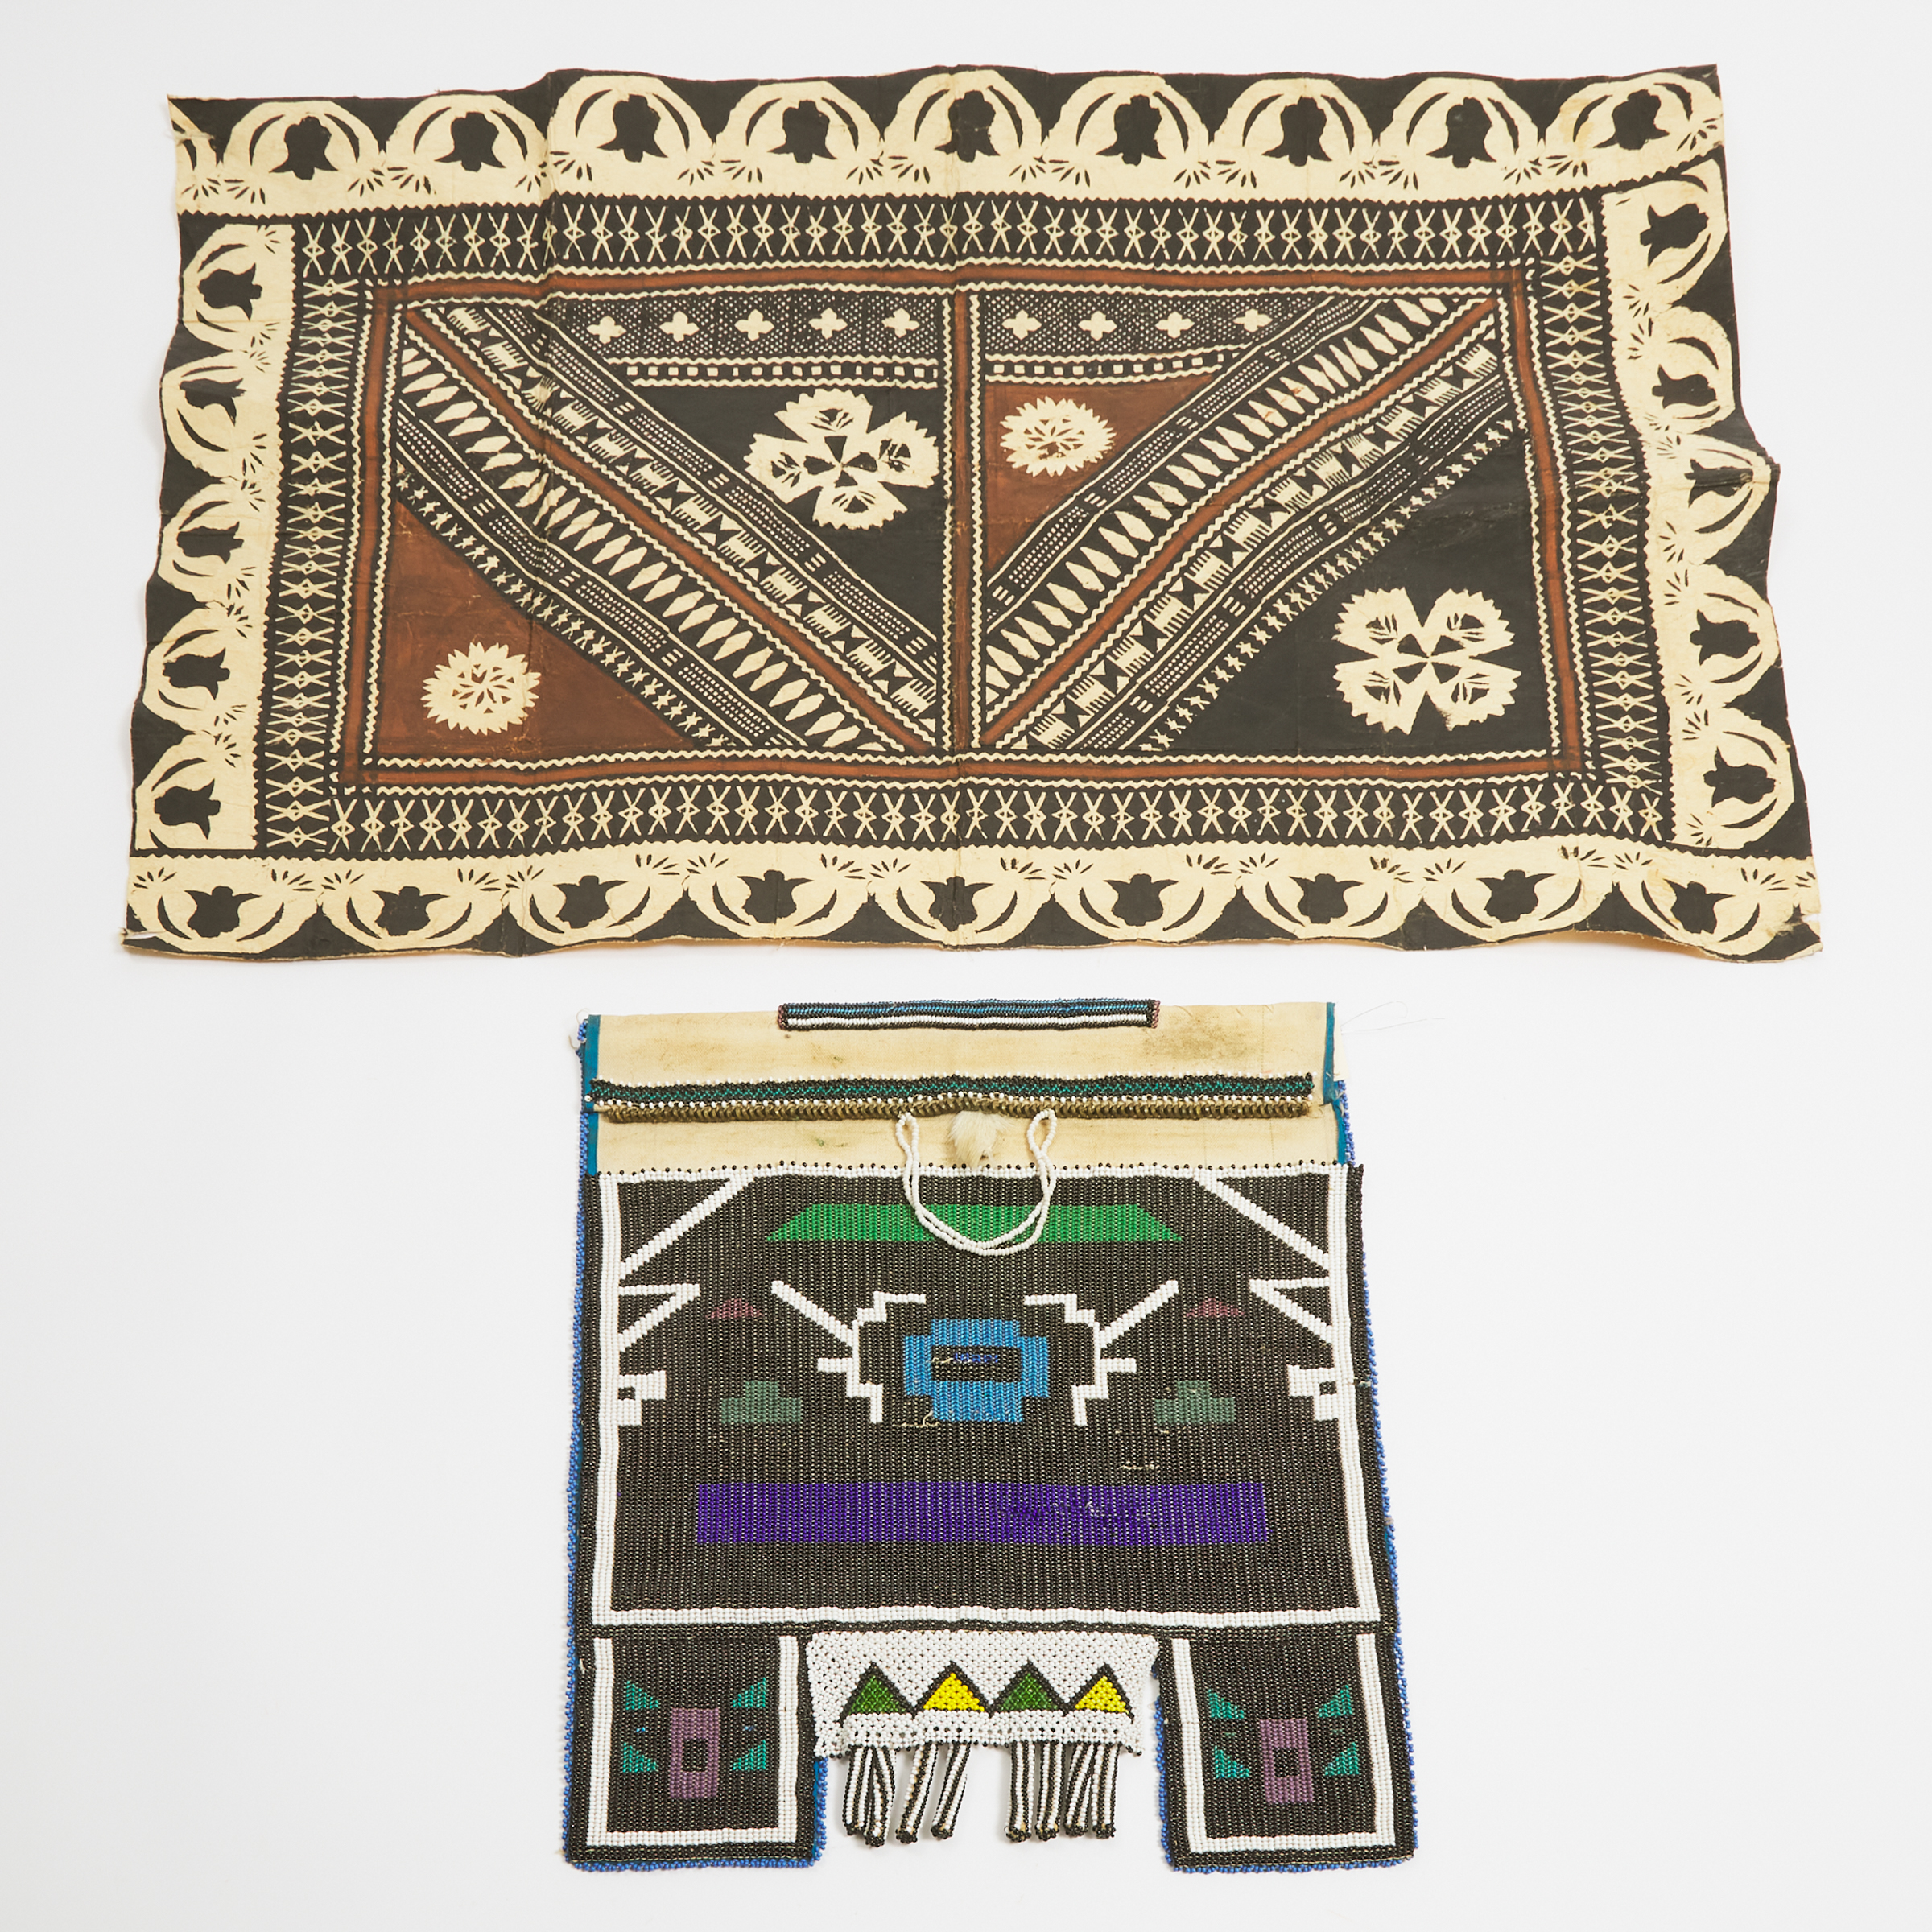 South African Beadwork Waist Cloth, c.1940/50, together with a Fiji Tapa Cloth, mid to late 20th century